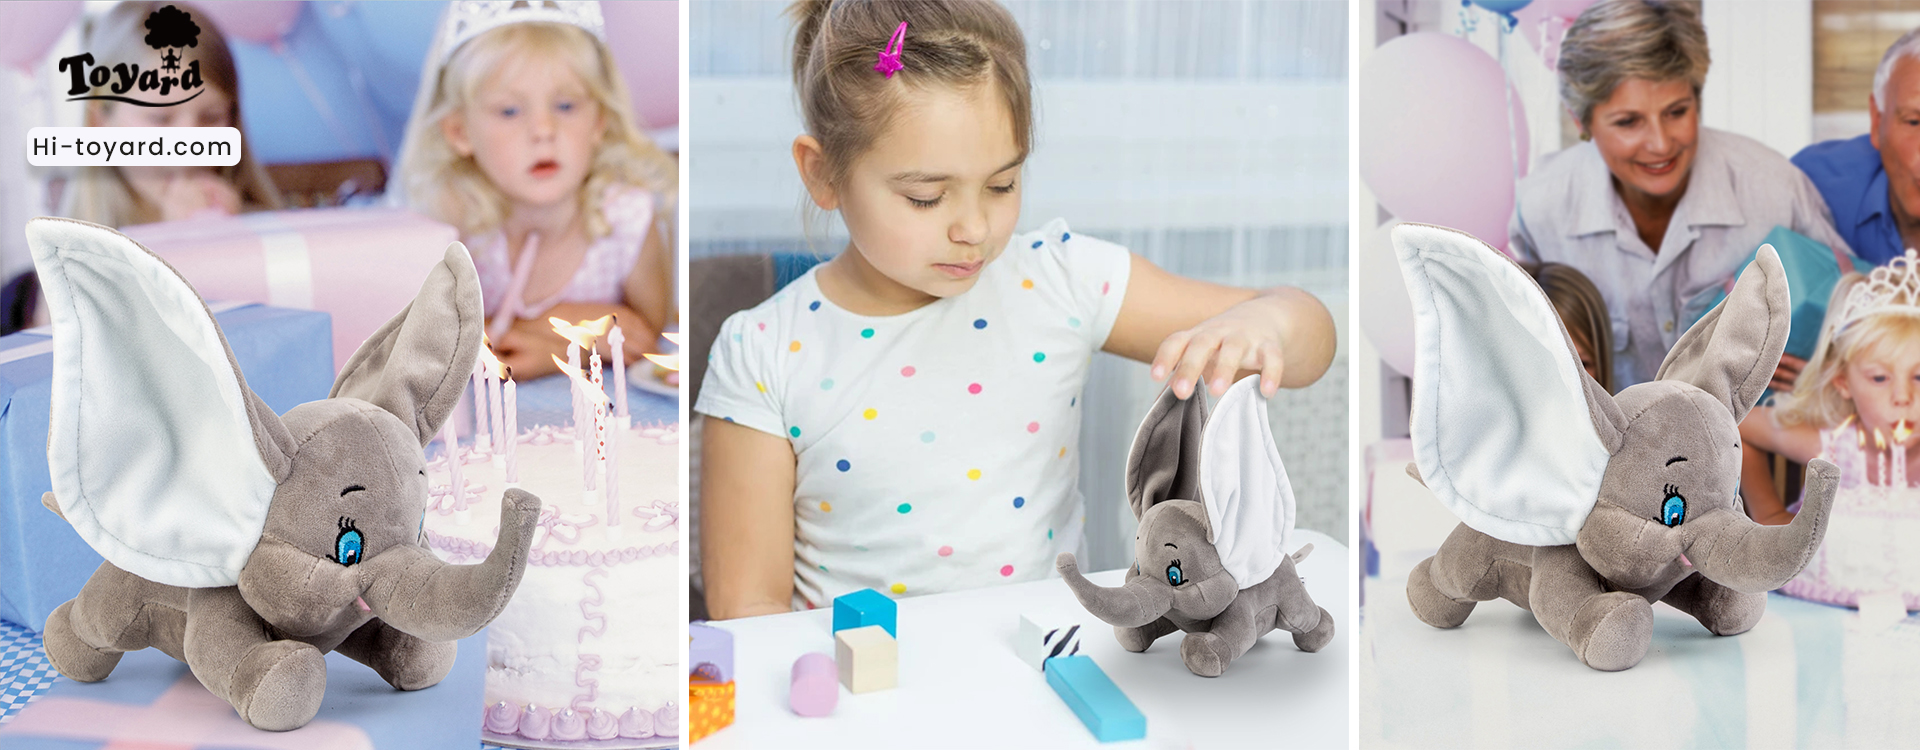 childs have fun Play with adorable elephant plush toy